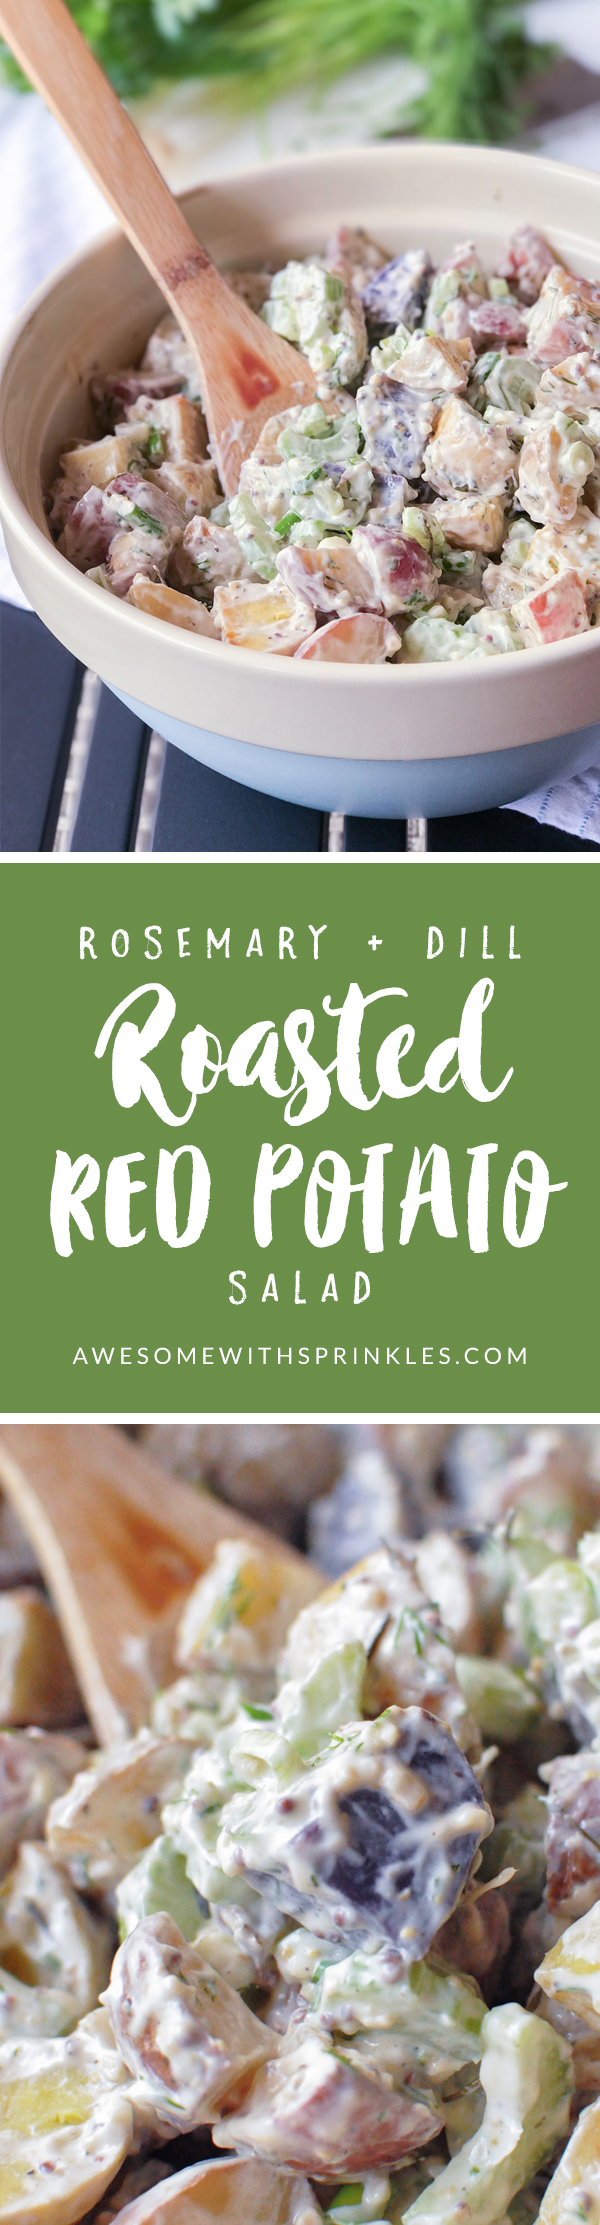 Crispy oven roasted red potatoes combined with fresh rosemary and dill herbs make for a savory twist on this classic BBQ staple. | Awesome with Sprinkles